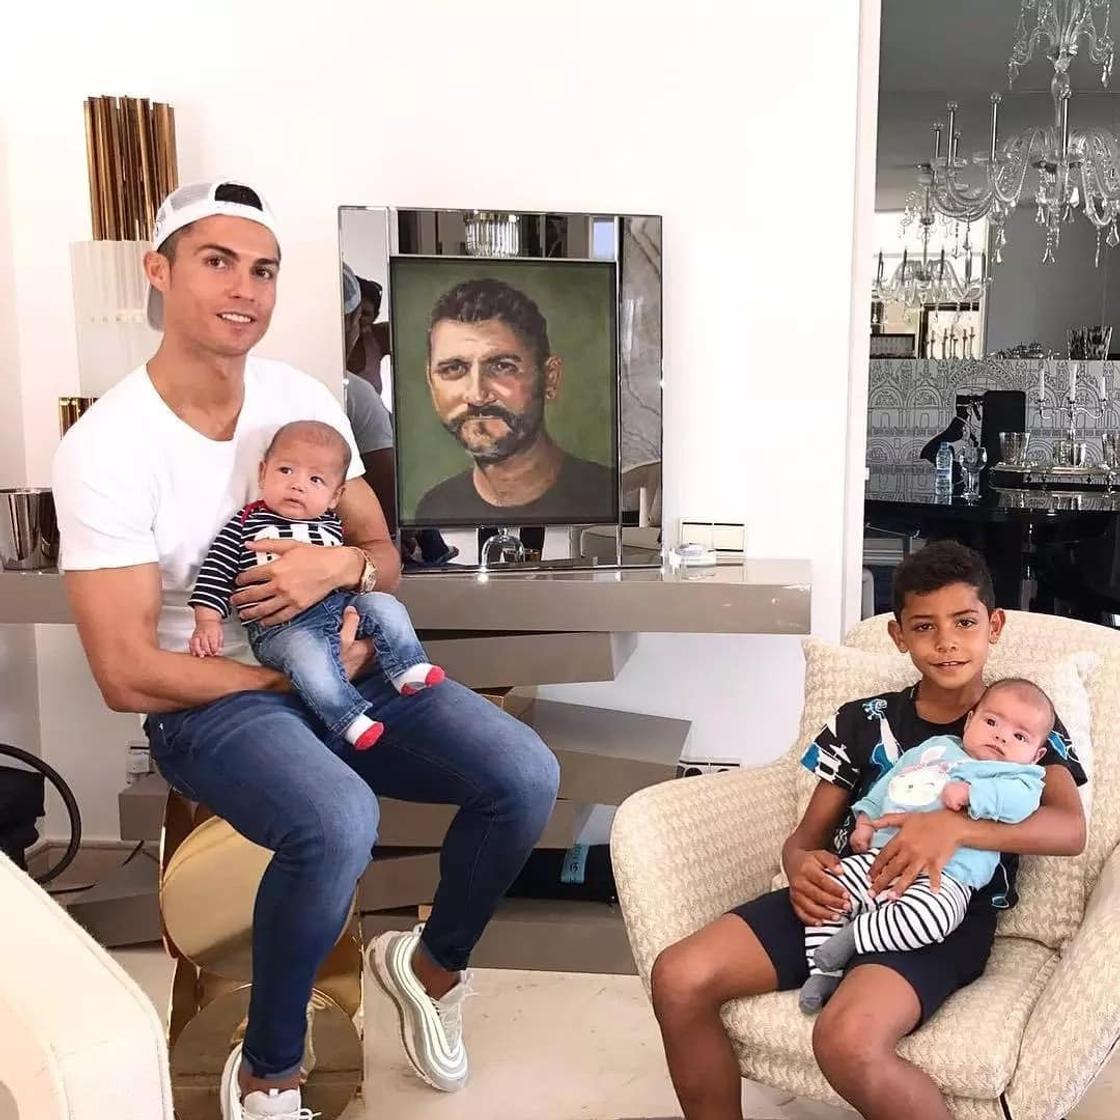 Cristiano Ronaldo pays touching tribute to his late father